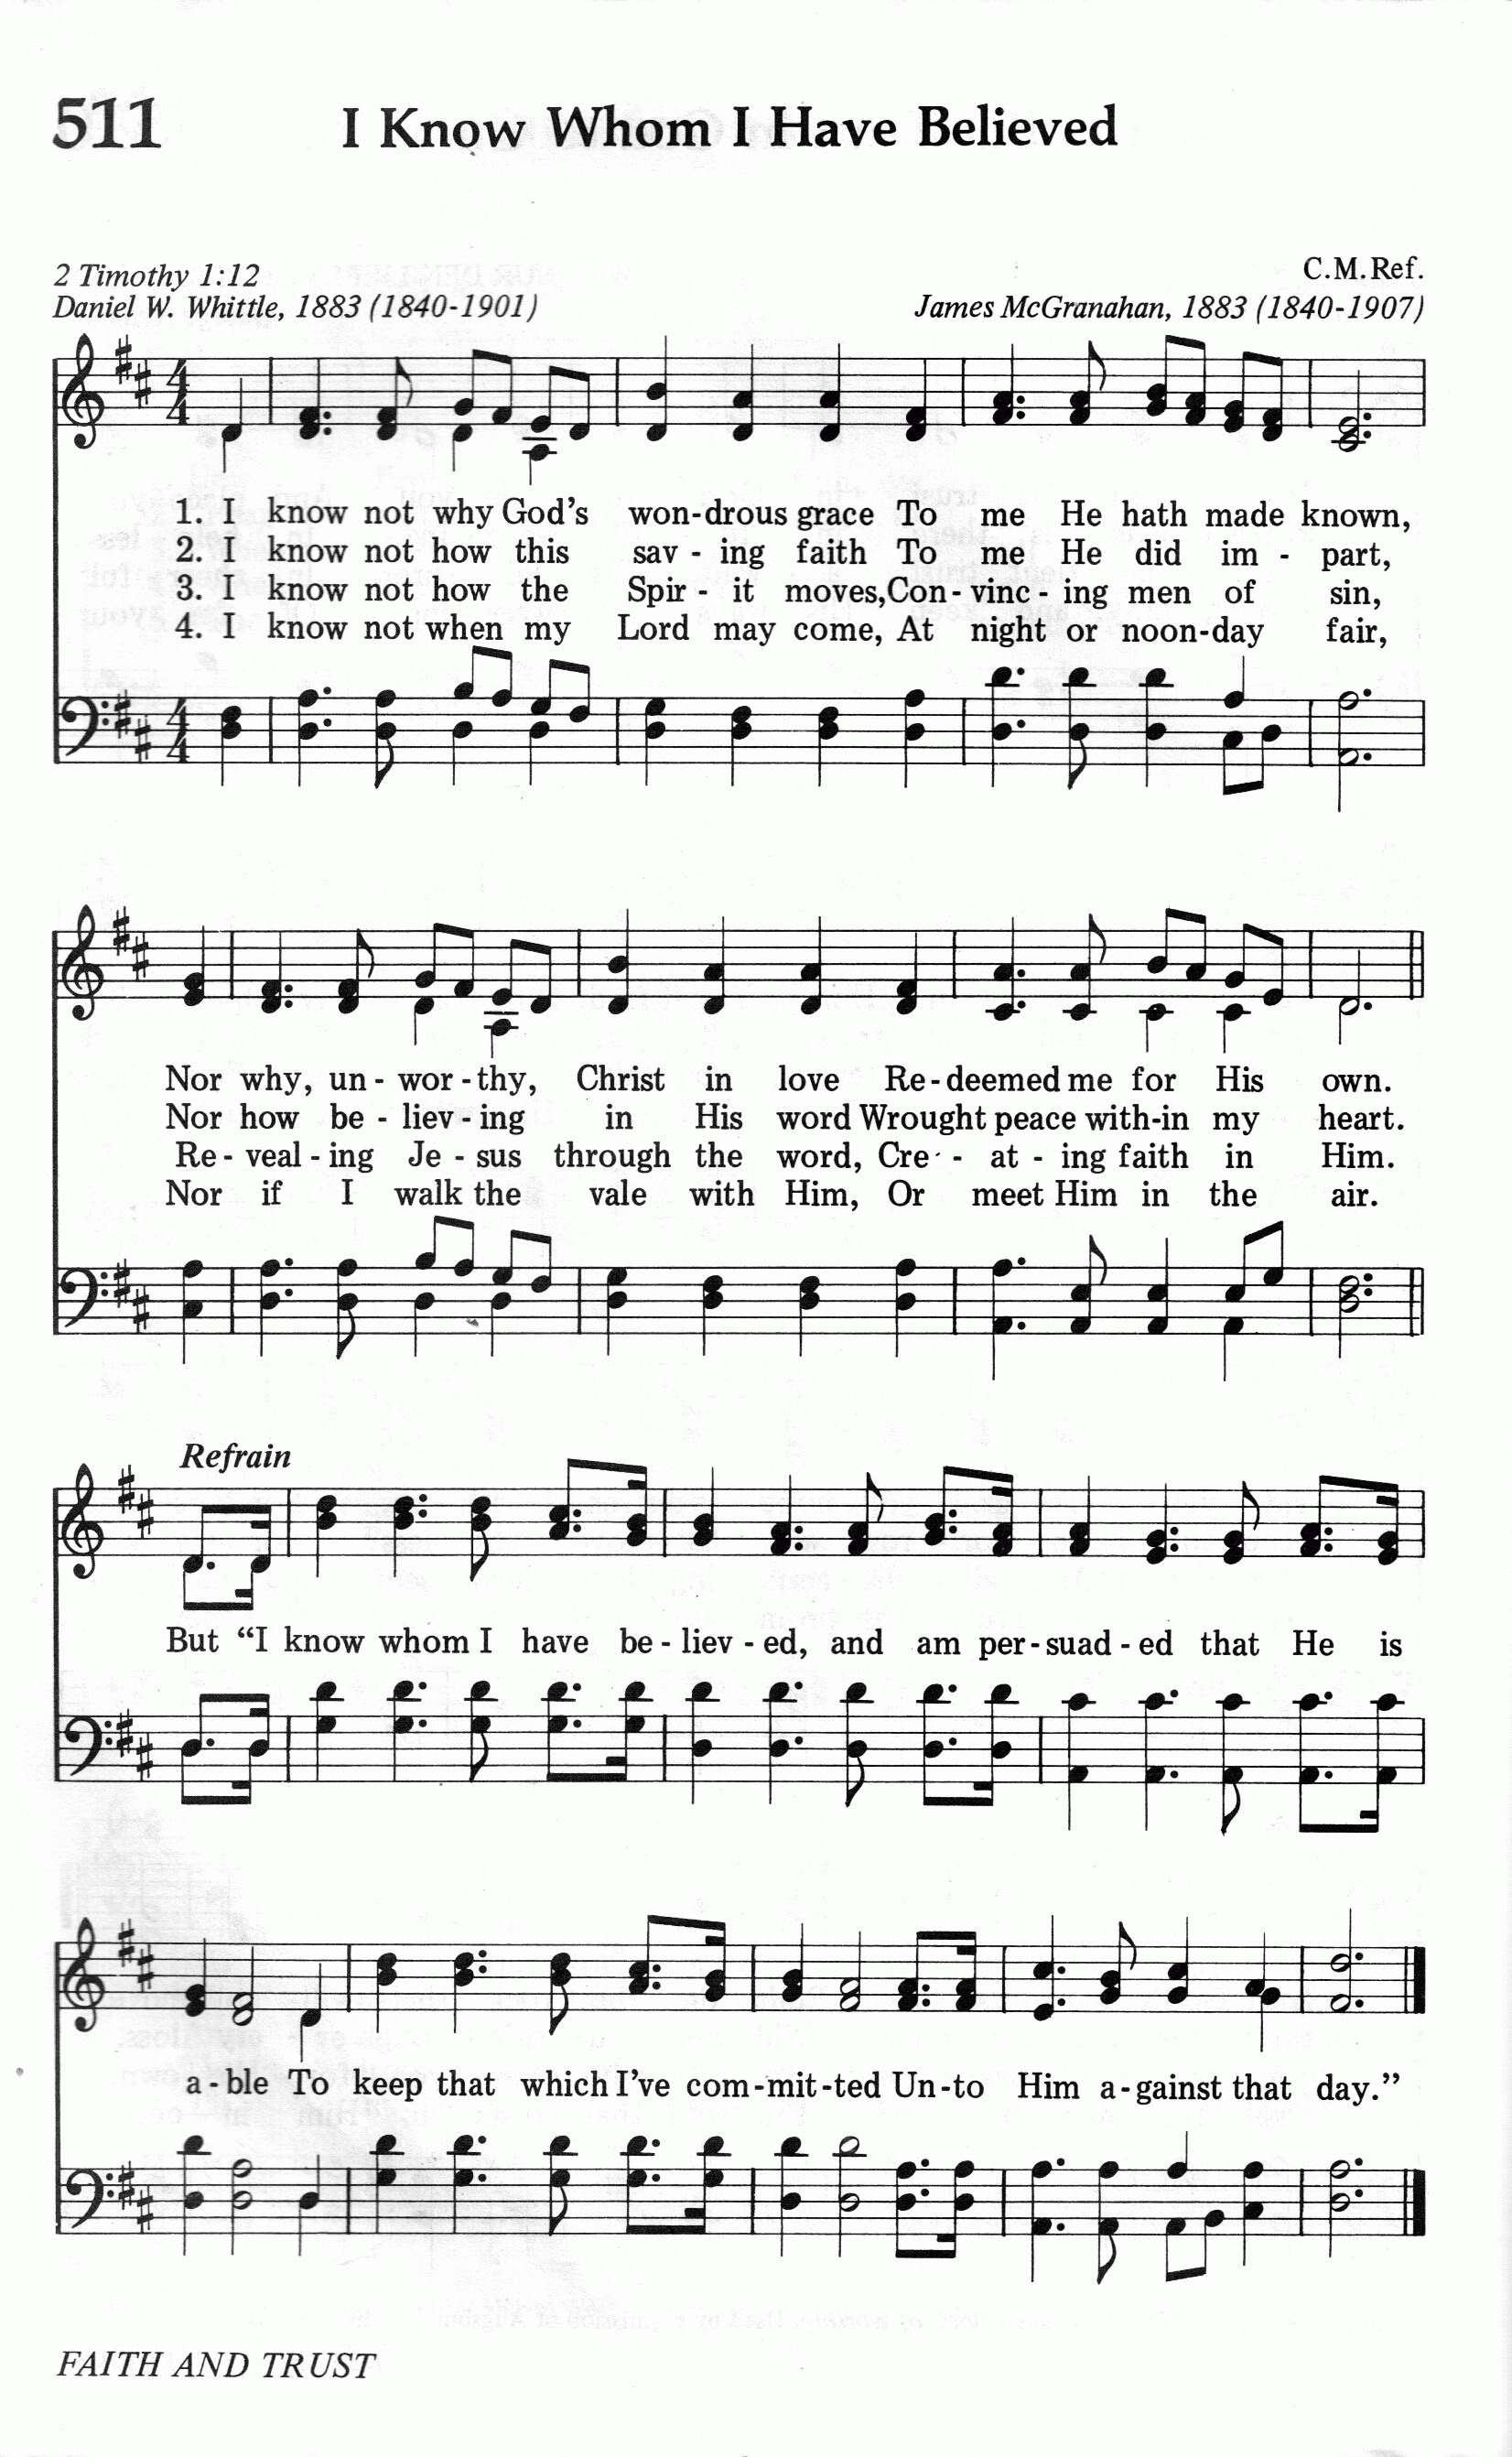 512.Just When I Need Him Most-695HYMN